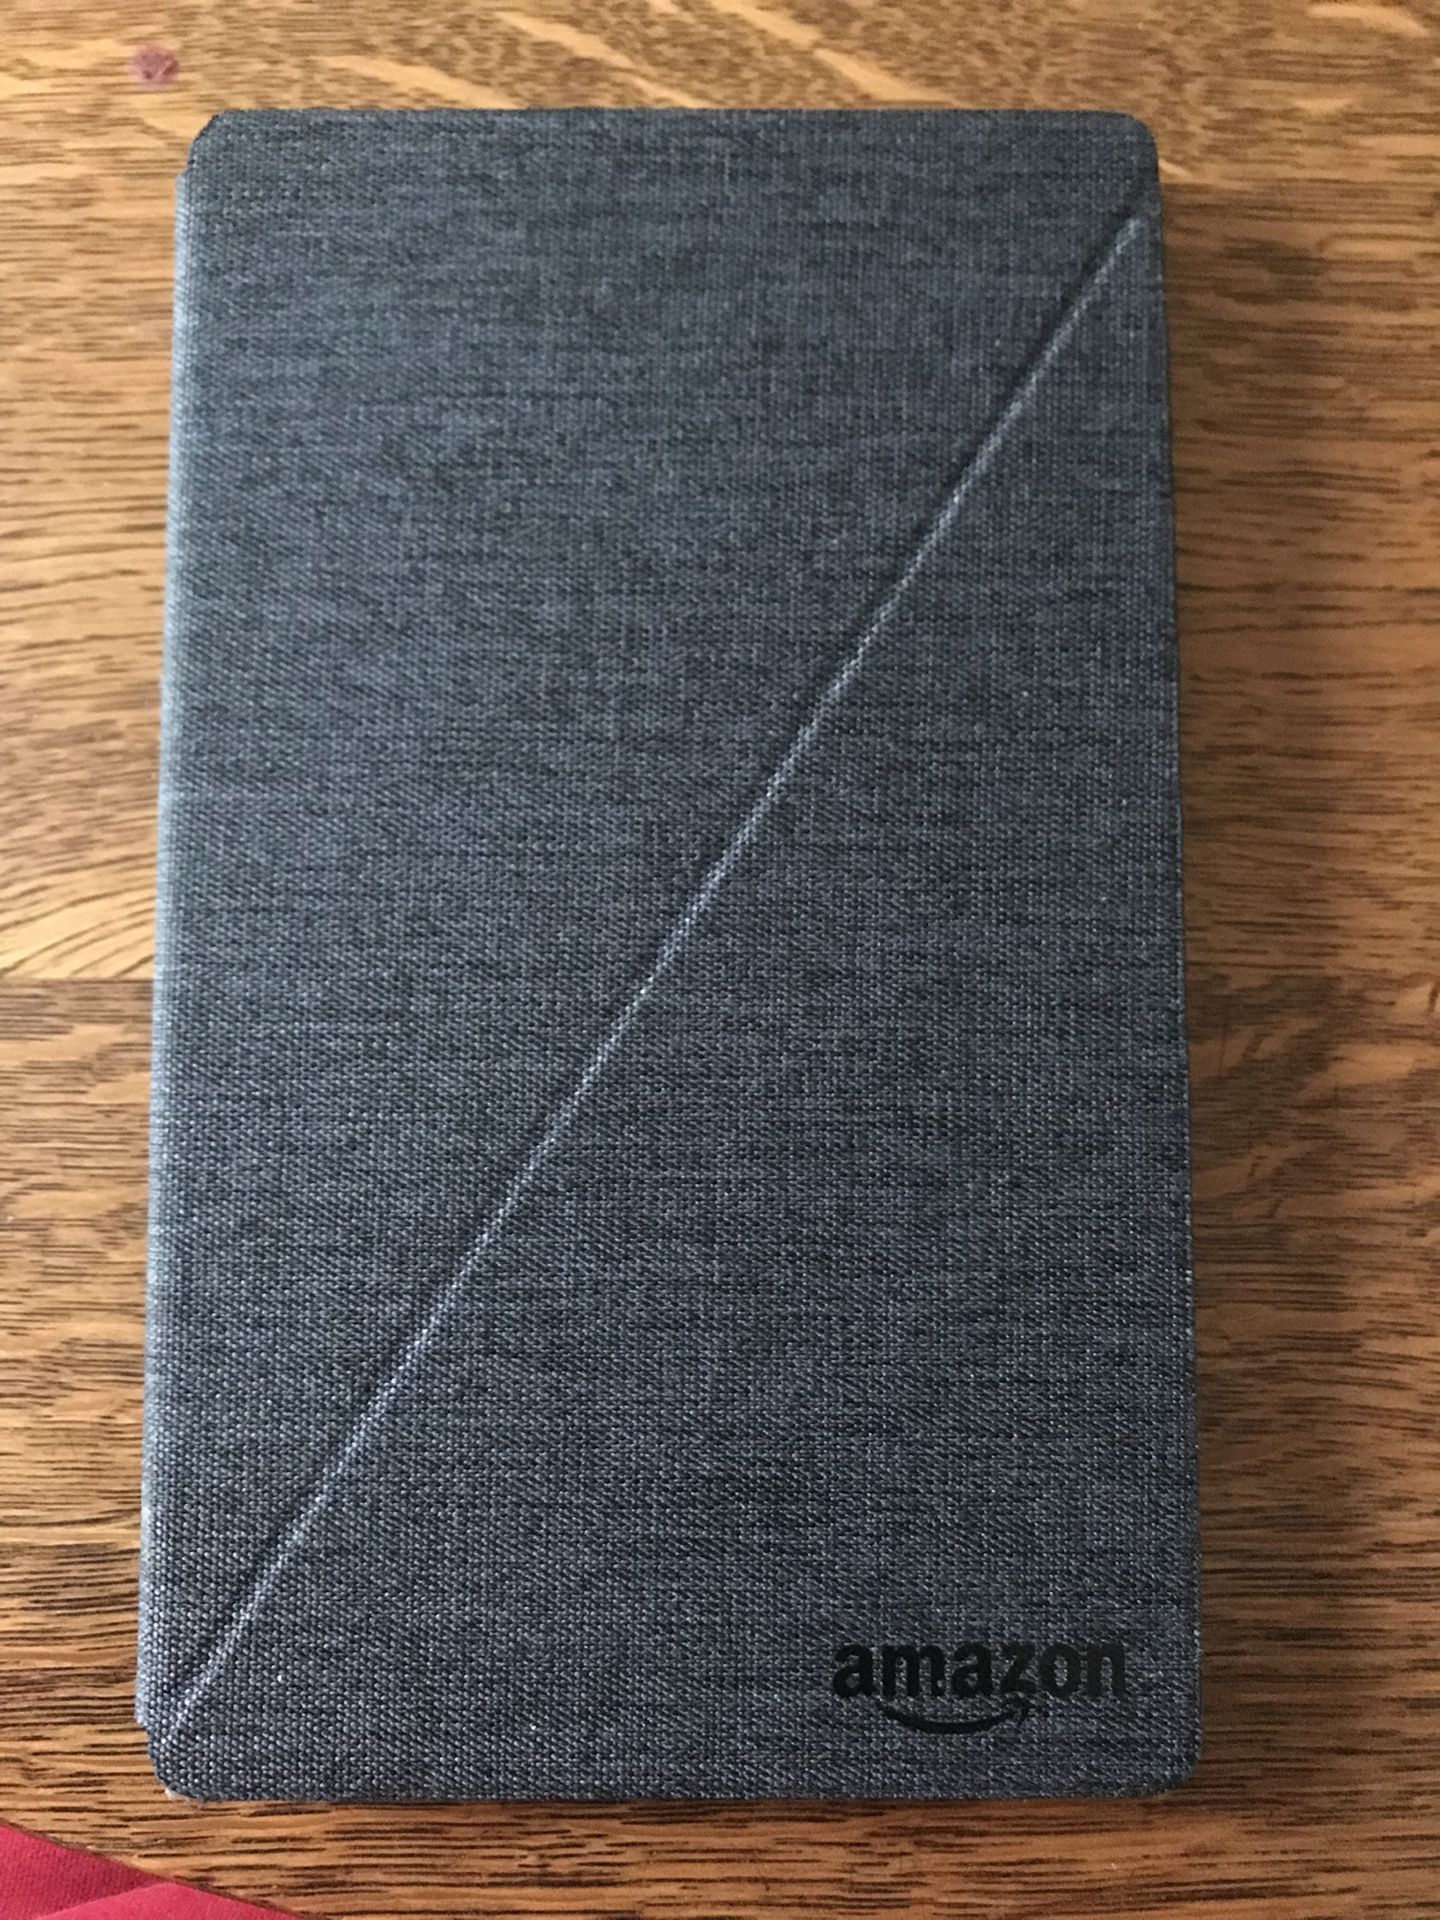 Amazon fire tablet brand new with case